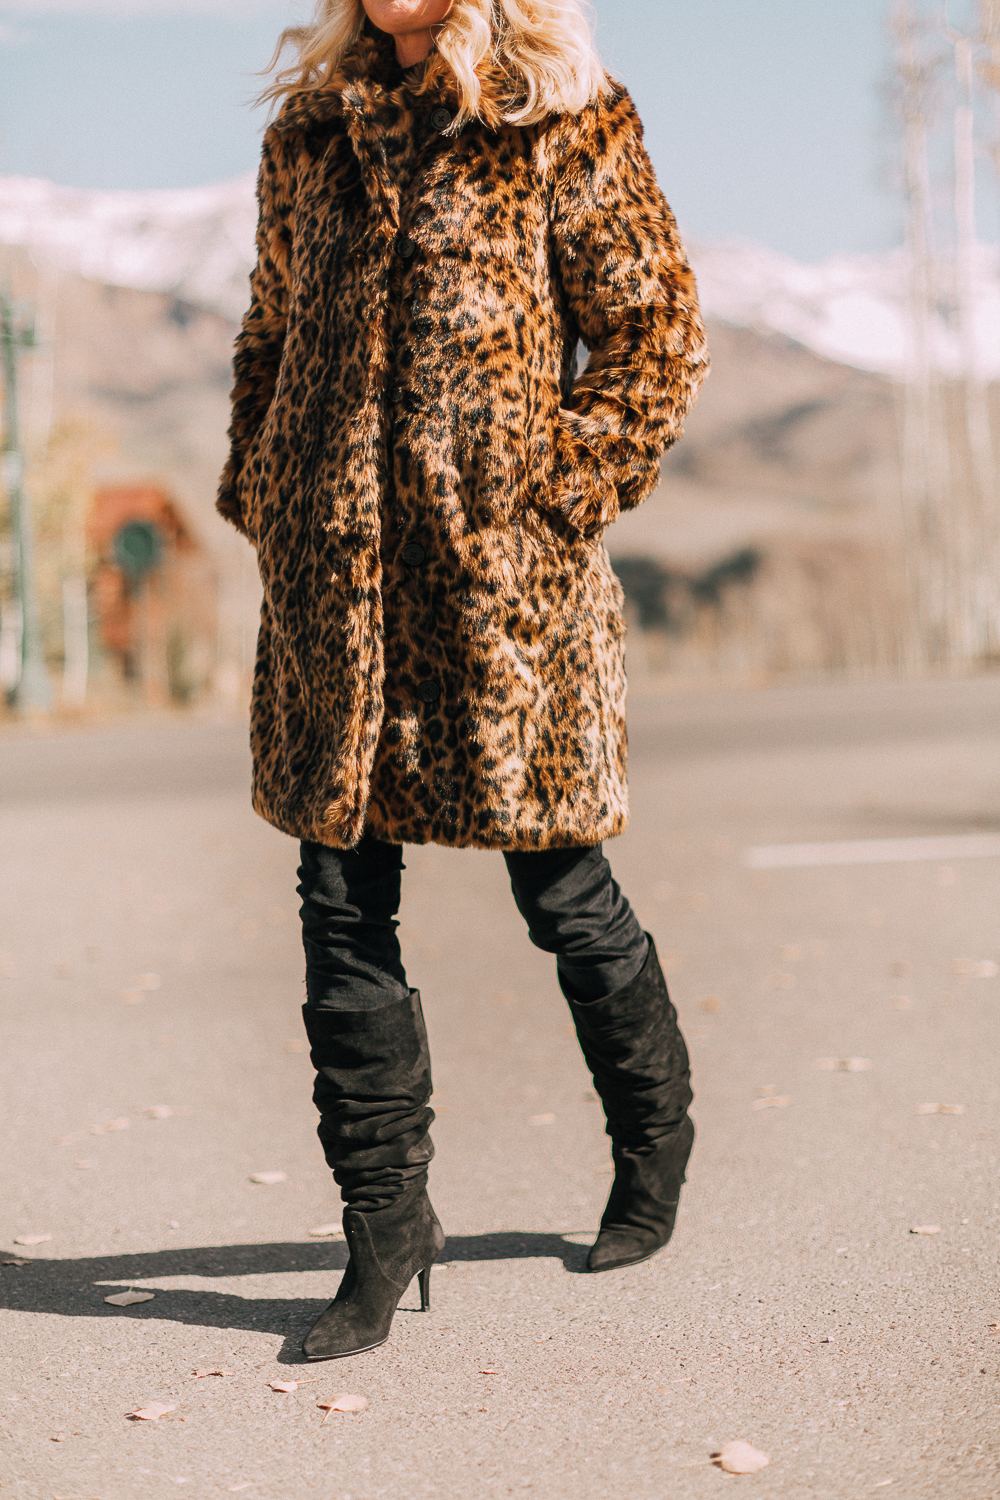 J.Crew faux fur leopard coat with slouchy knee high boots blogger outfit for fall and winter